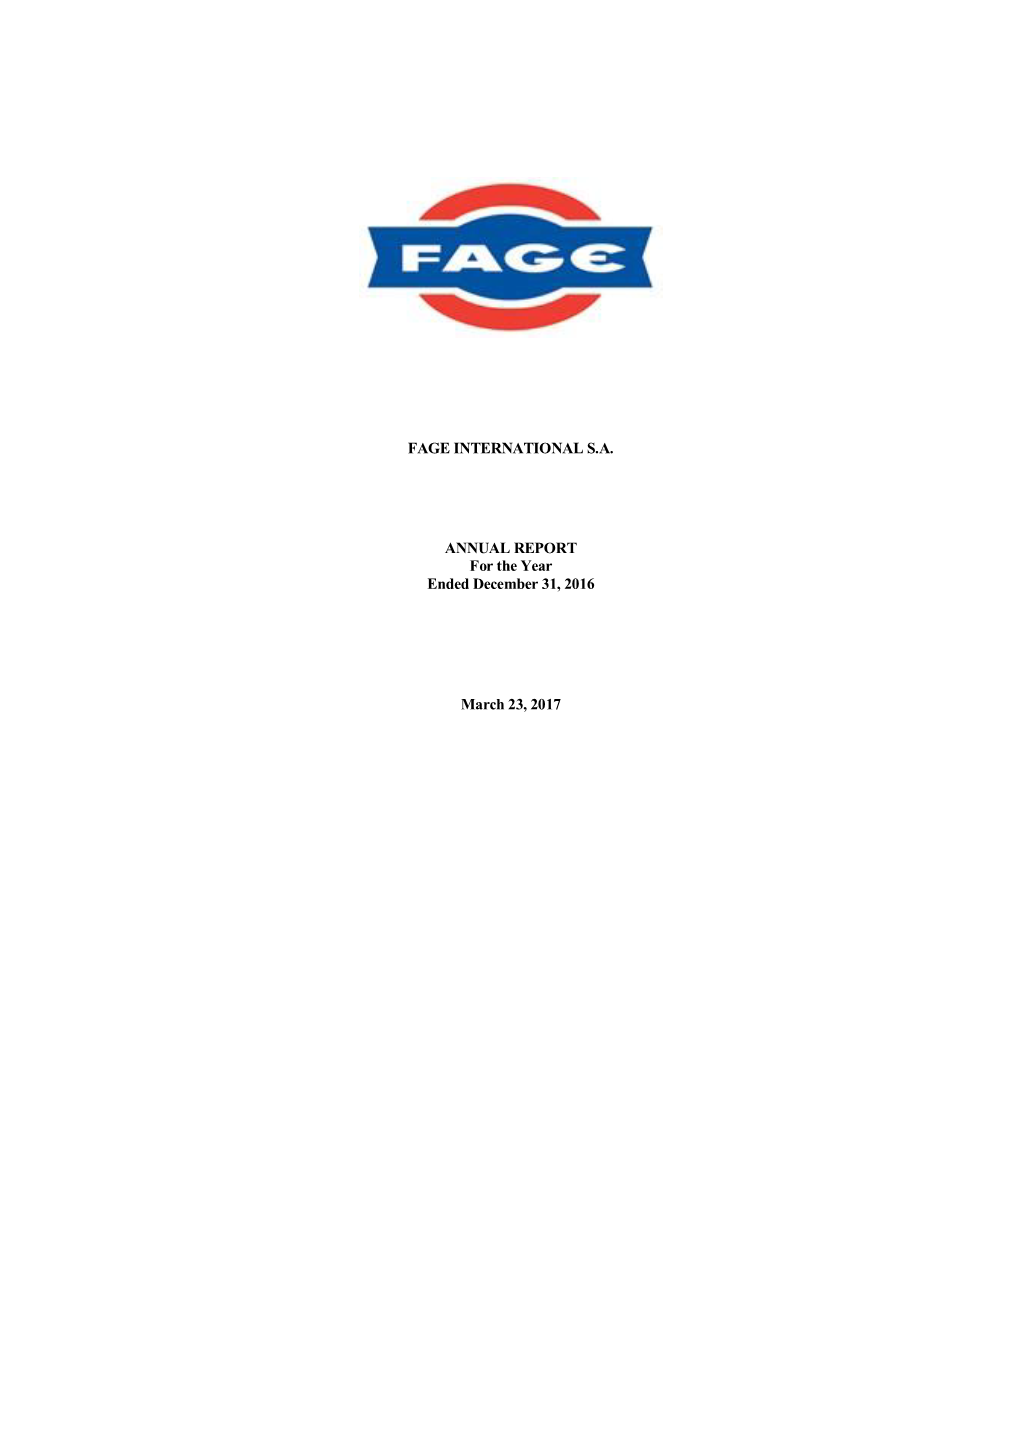 FAGE INTERNATIONAL S.A. ANNUAL REPORT for the Year Ended December 31, 2016 March 23, 2017